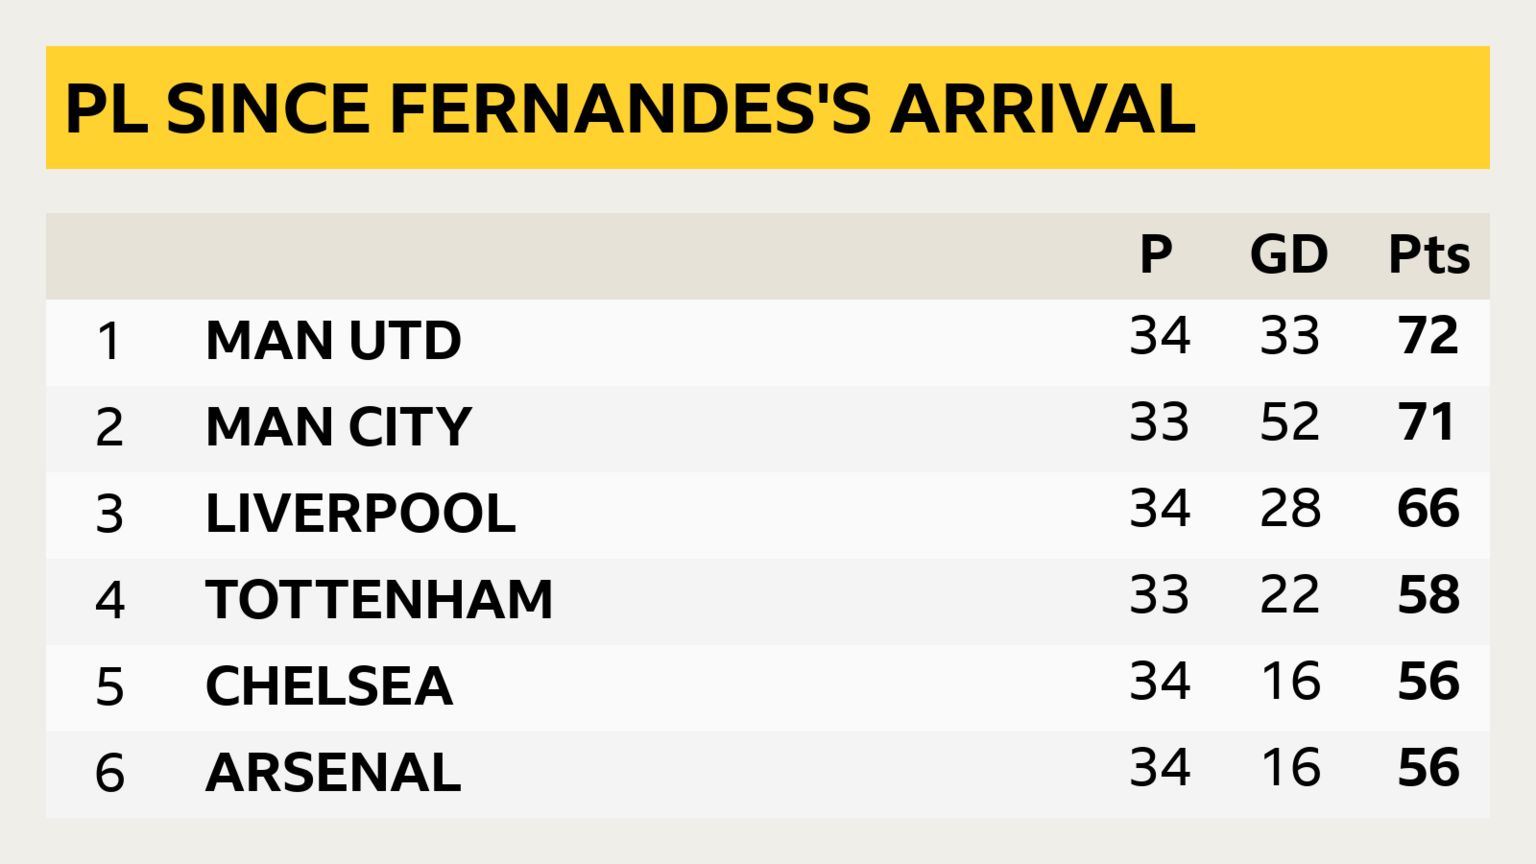 Premier League table since Bruno Fernandes joined Man: 1 Man Utd 72 pts, 2 Man City 71 pts, 3 Liverpool 66 pts, 4 Tottenham 58 pts, 5 Chelsea 56 pts, 6 Arsenal 56 pts